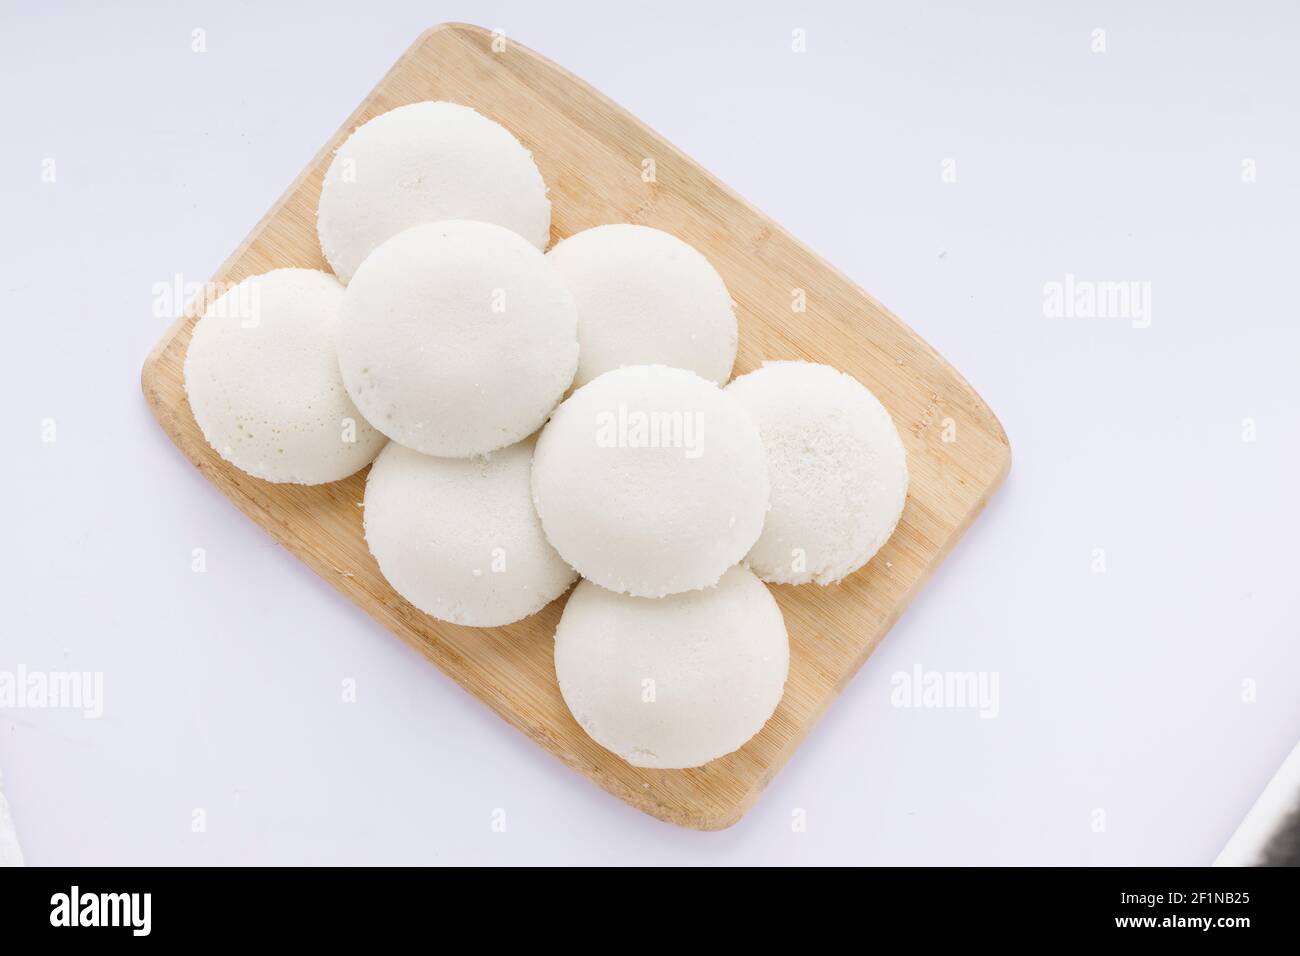 Idly or Idli, south indian main breakfast item which is beautifully arranged in a wooden base with white background. Stock Photo